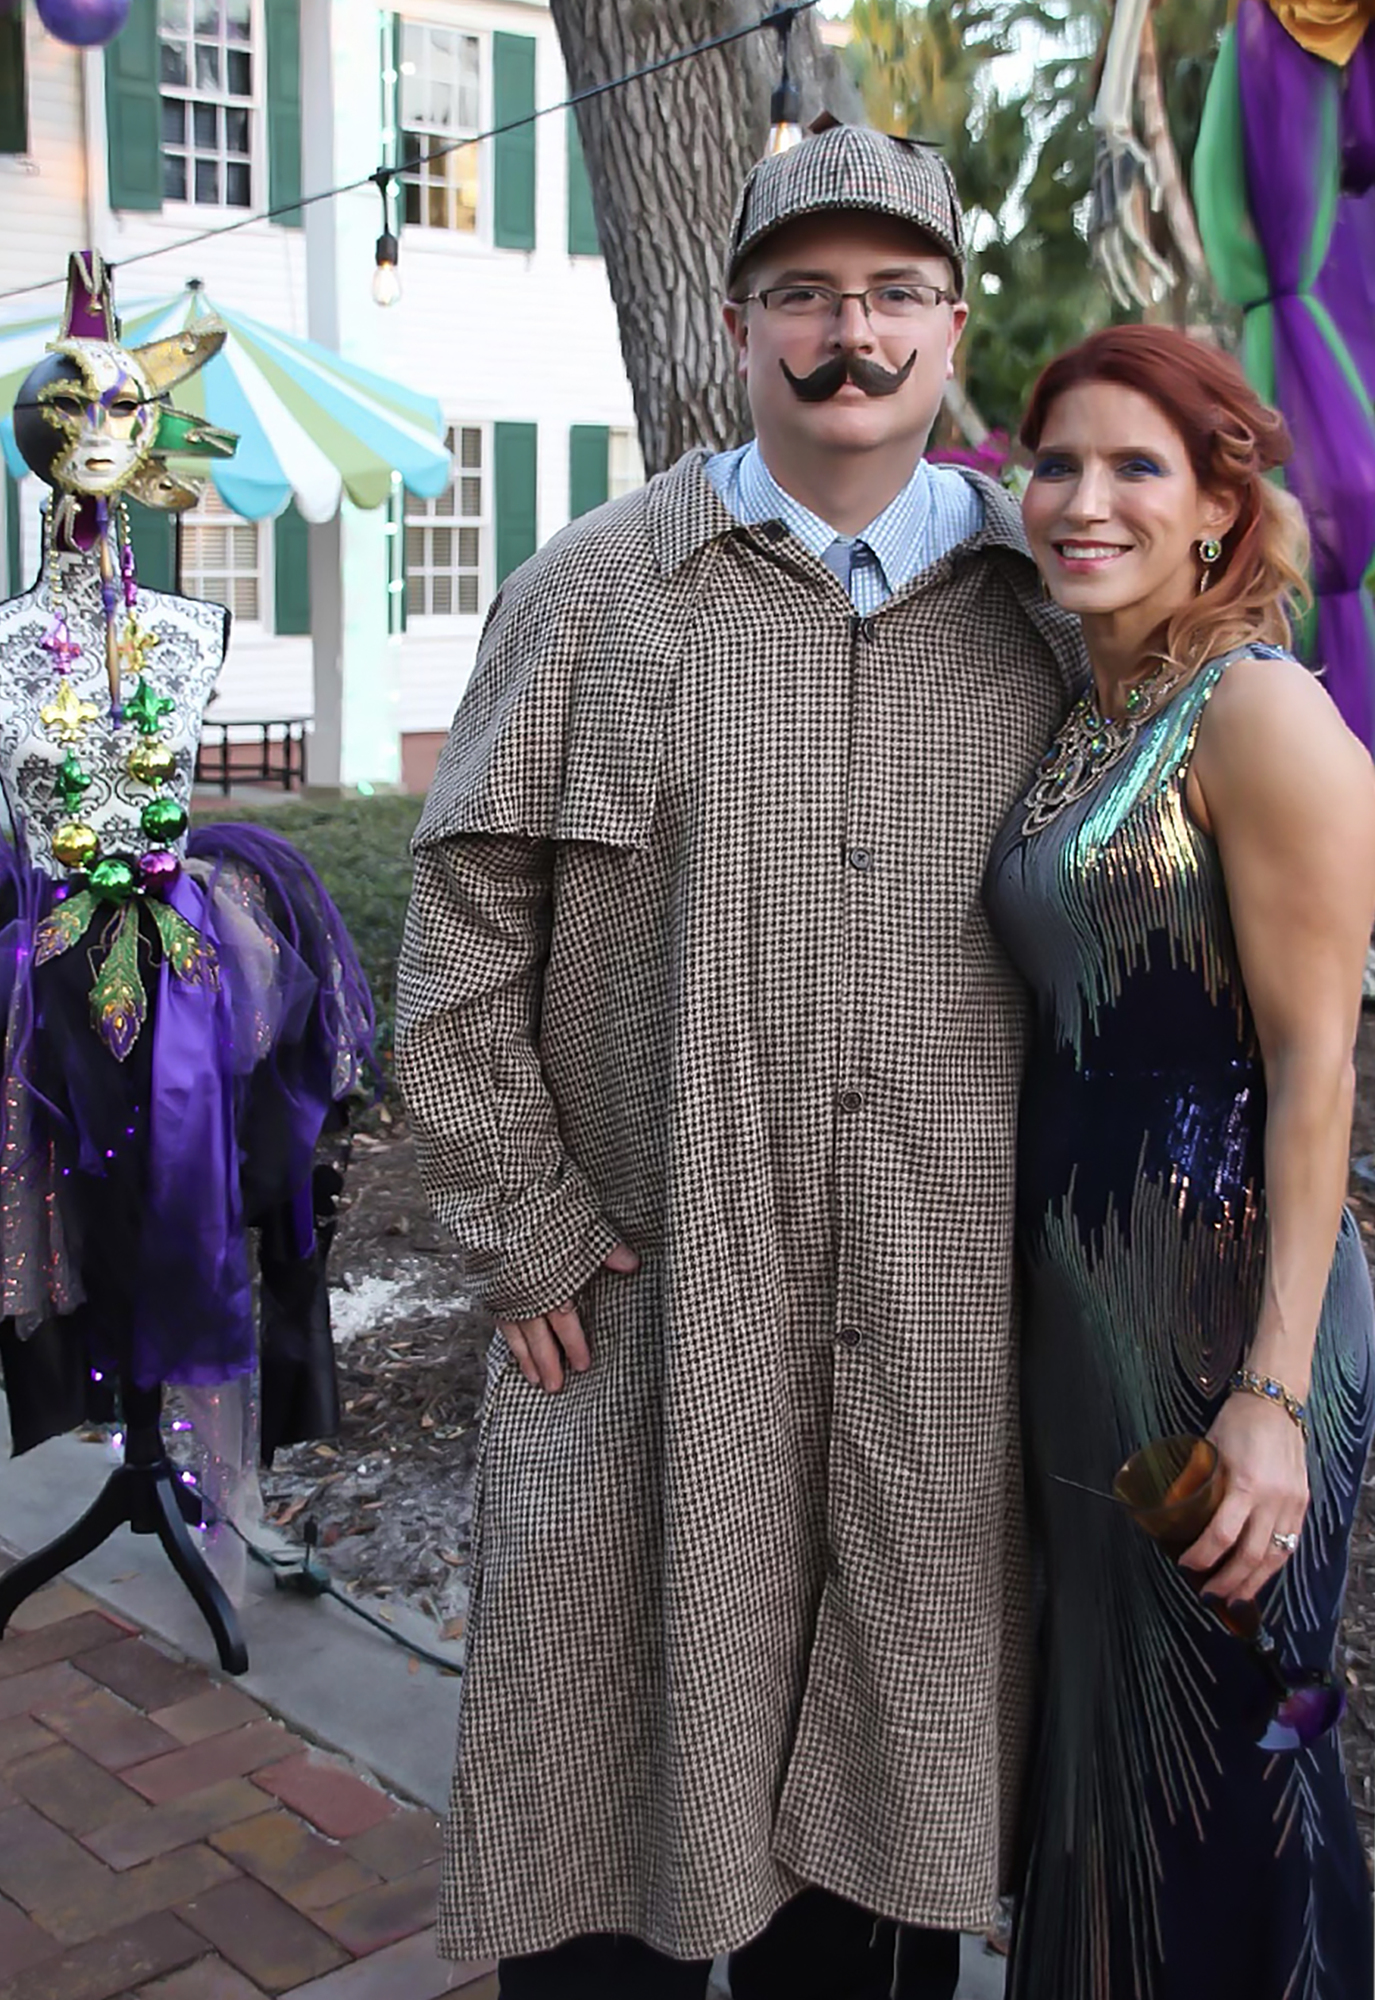 Tim and Catherine Root host the Mardi Gras Murder Mystery at their historical Rowallan home. Courtesy photo by Shirley James